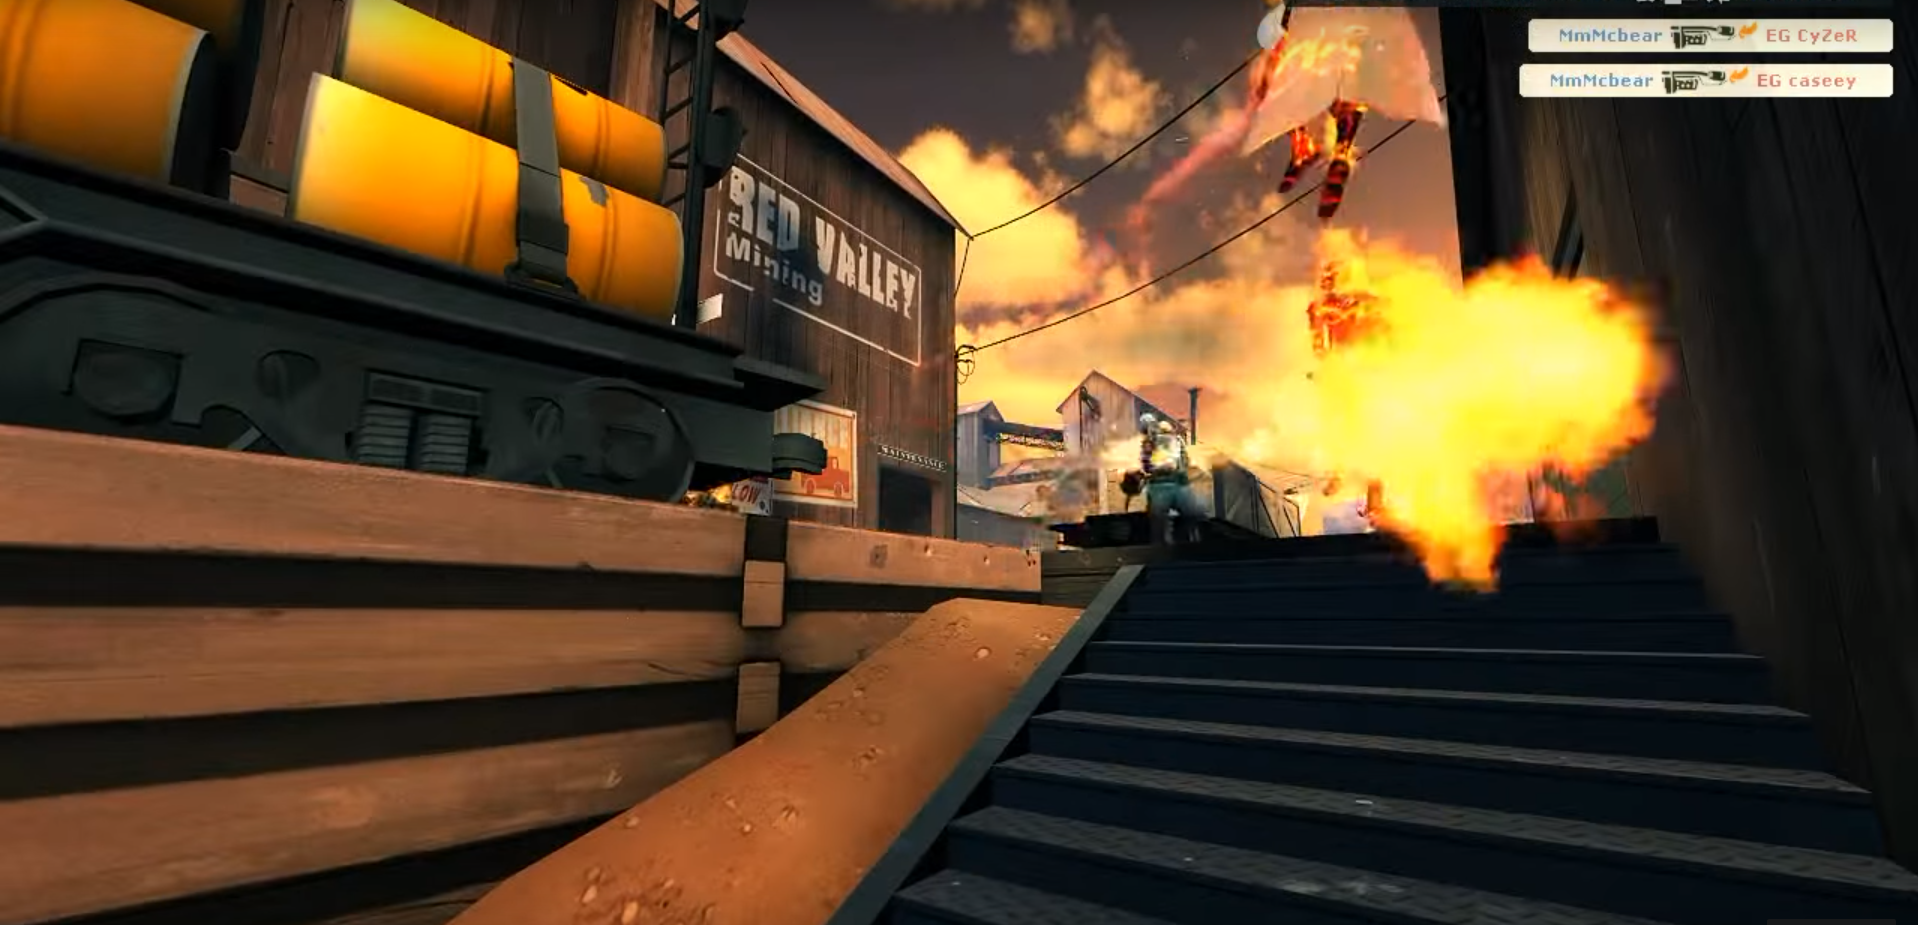 MmM roamer cbear on pyro flanking through shithouse against EG on mid (image taken from one of TF2's most phenomenal frag videos, Muscle Milk and Moolians)